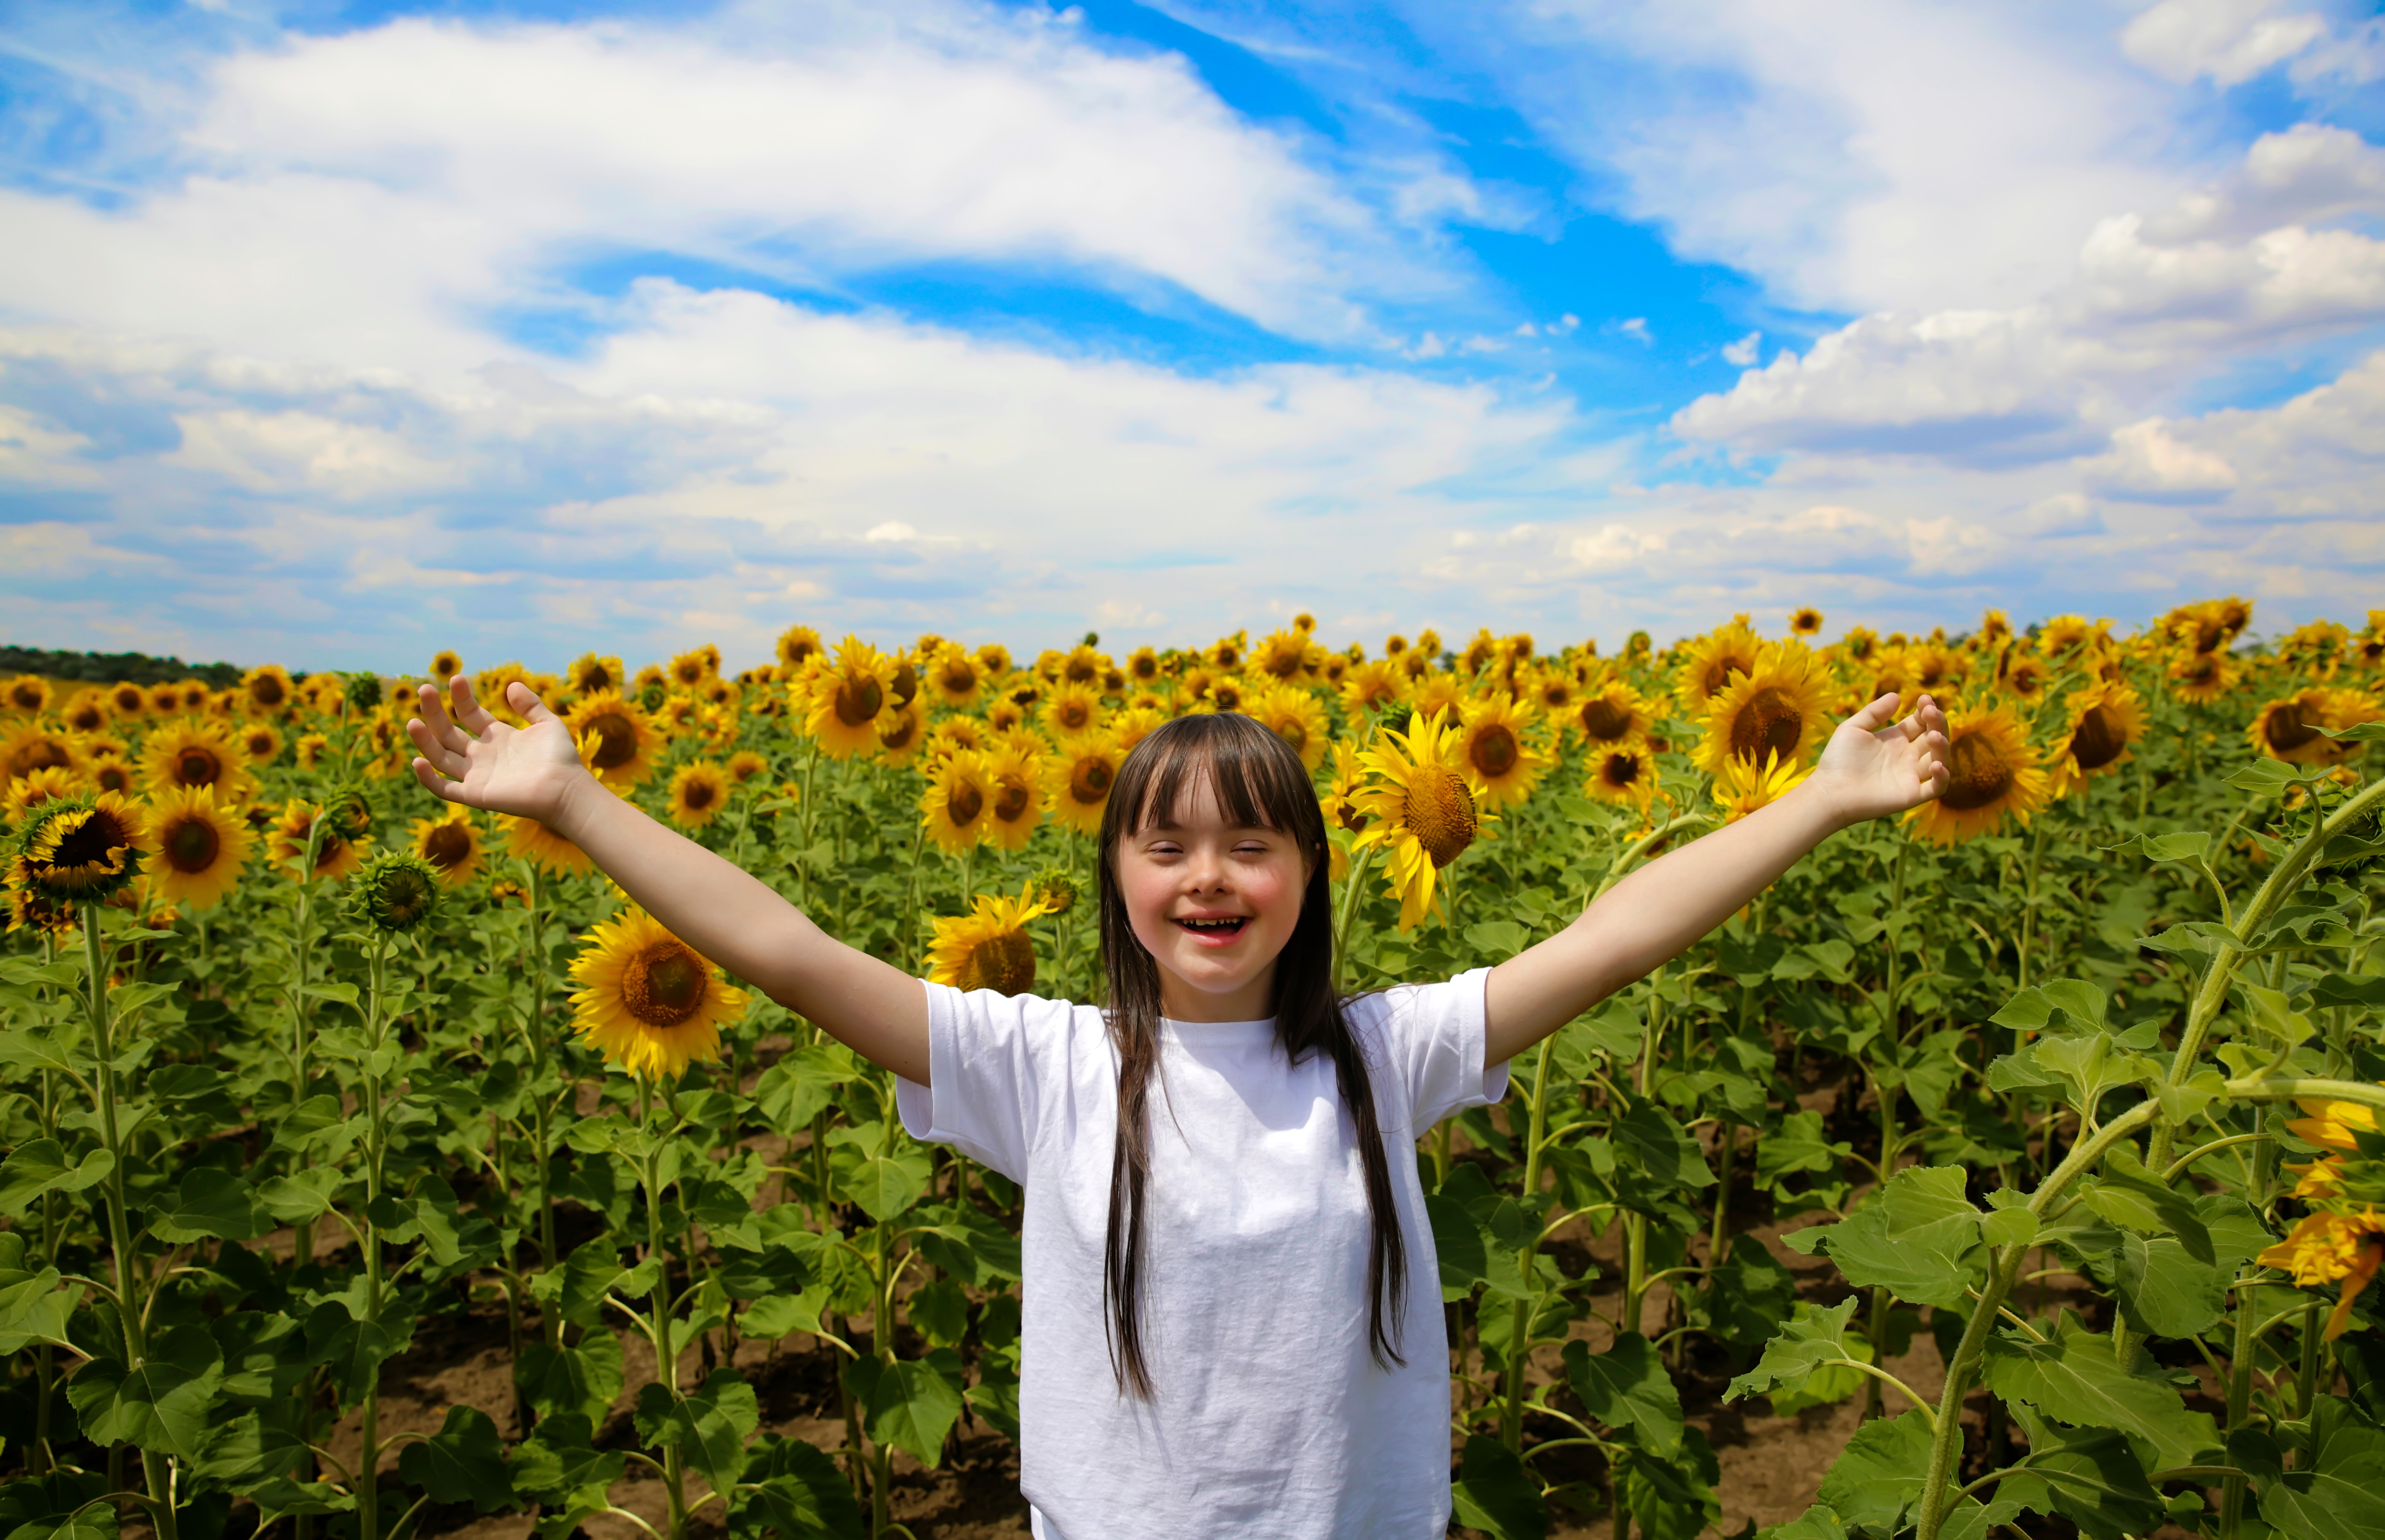 A child stands with arms up in front of sunflowers